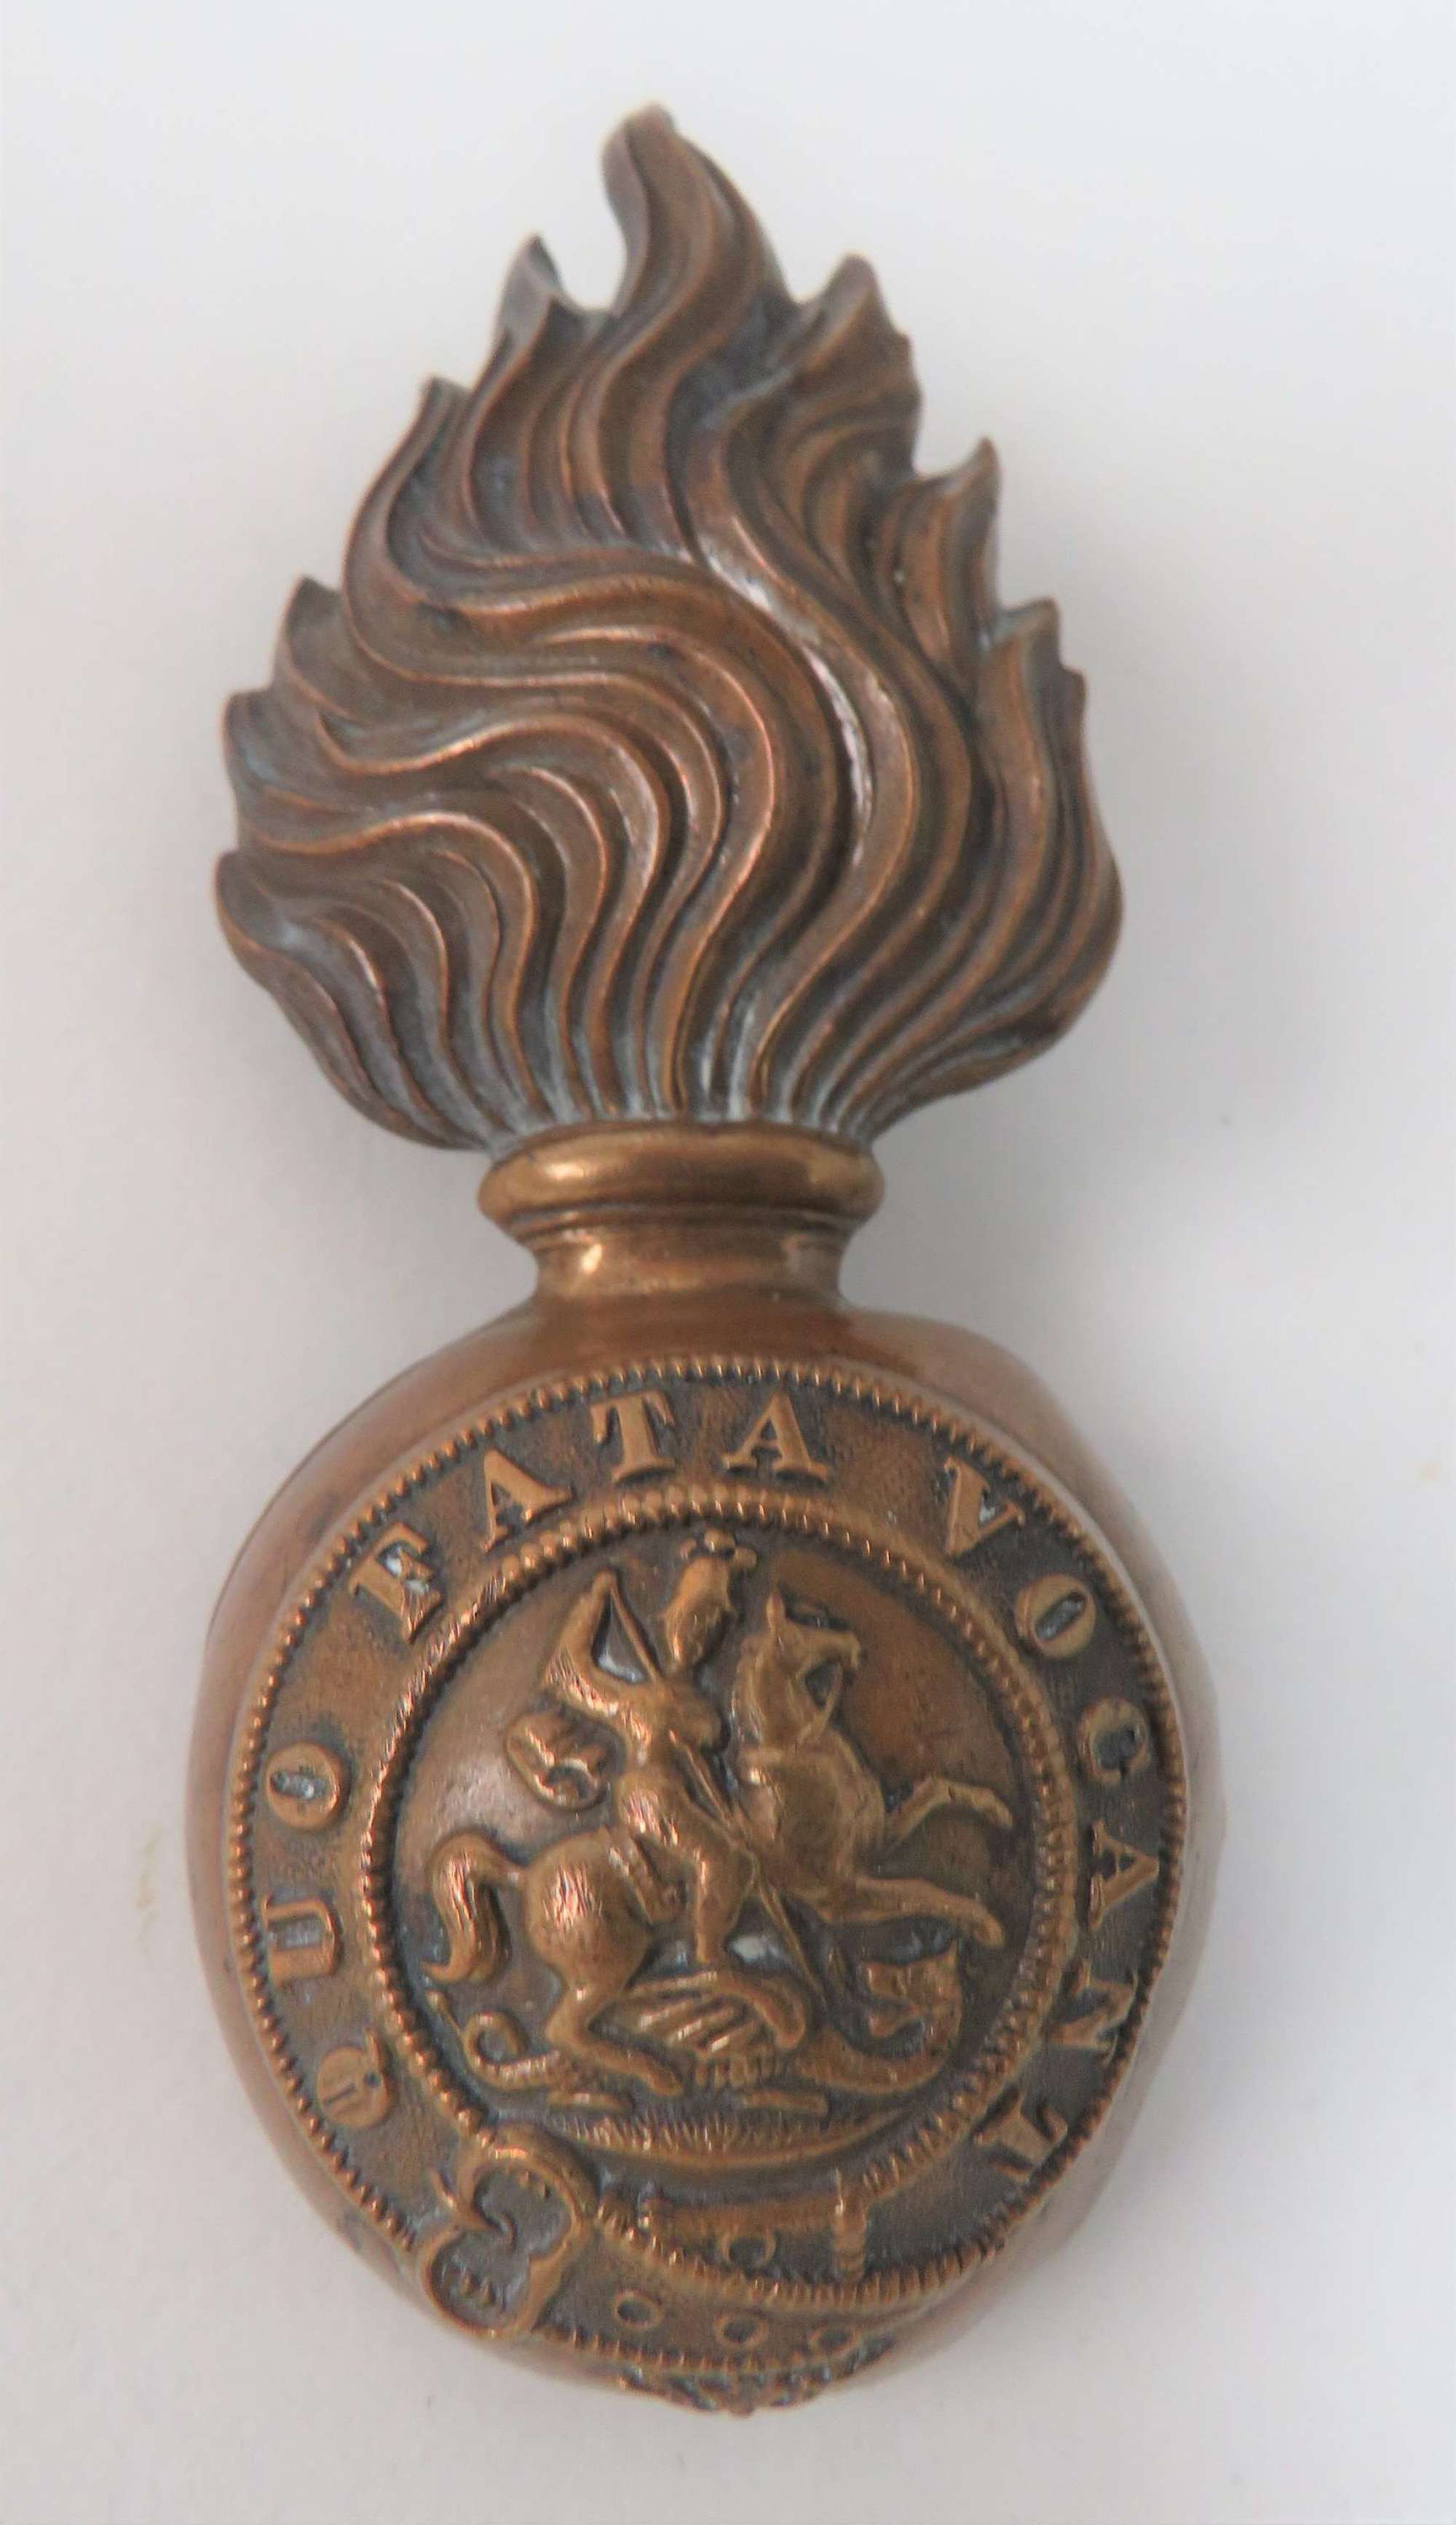 Northumberland Fusiliers Dress Busby Badge